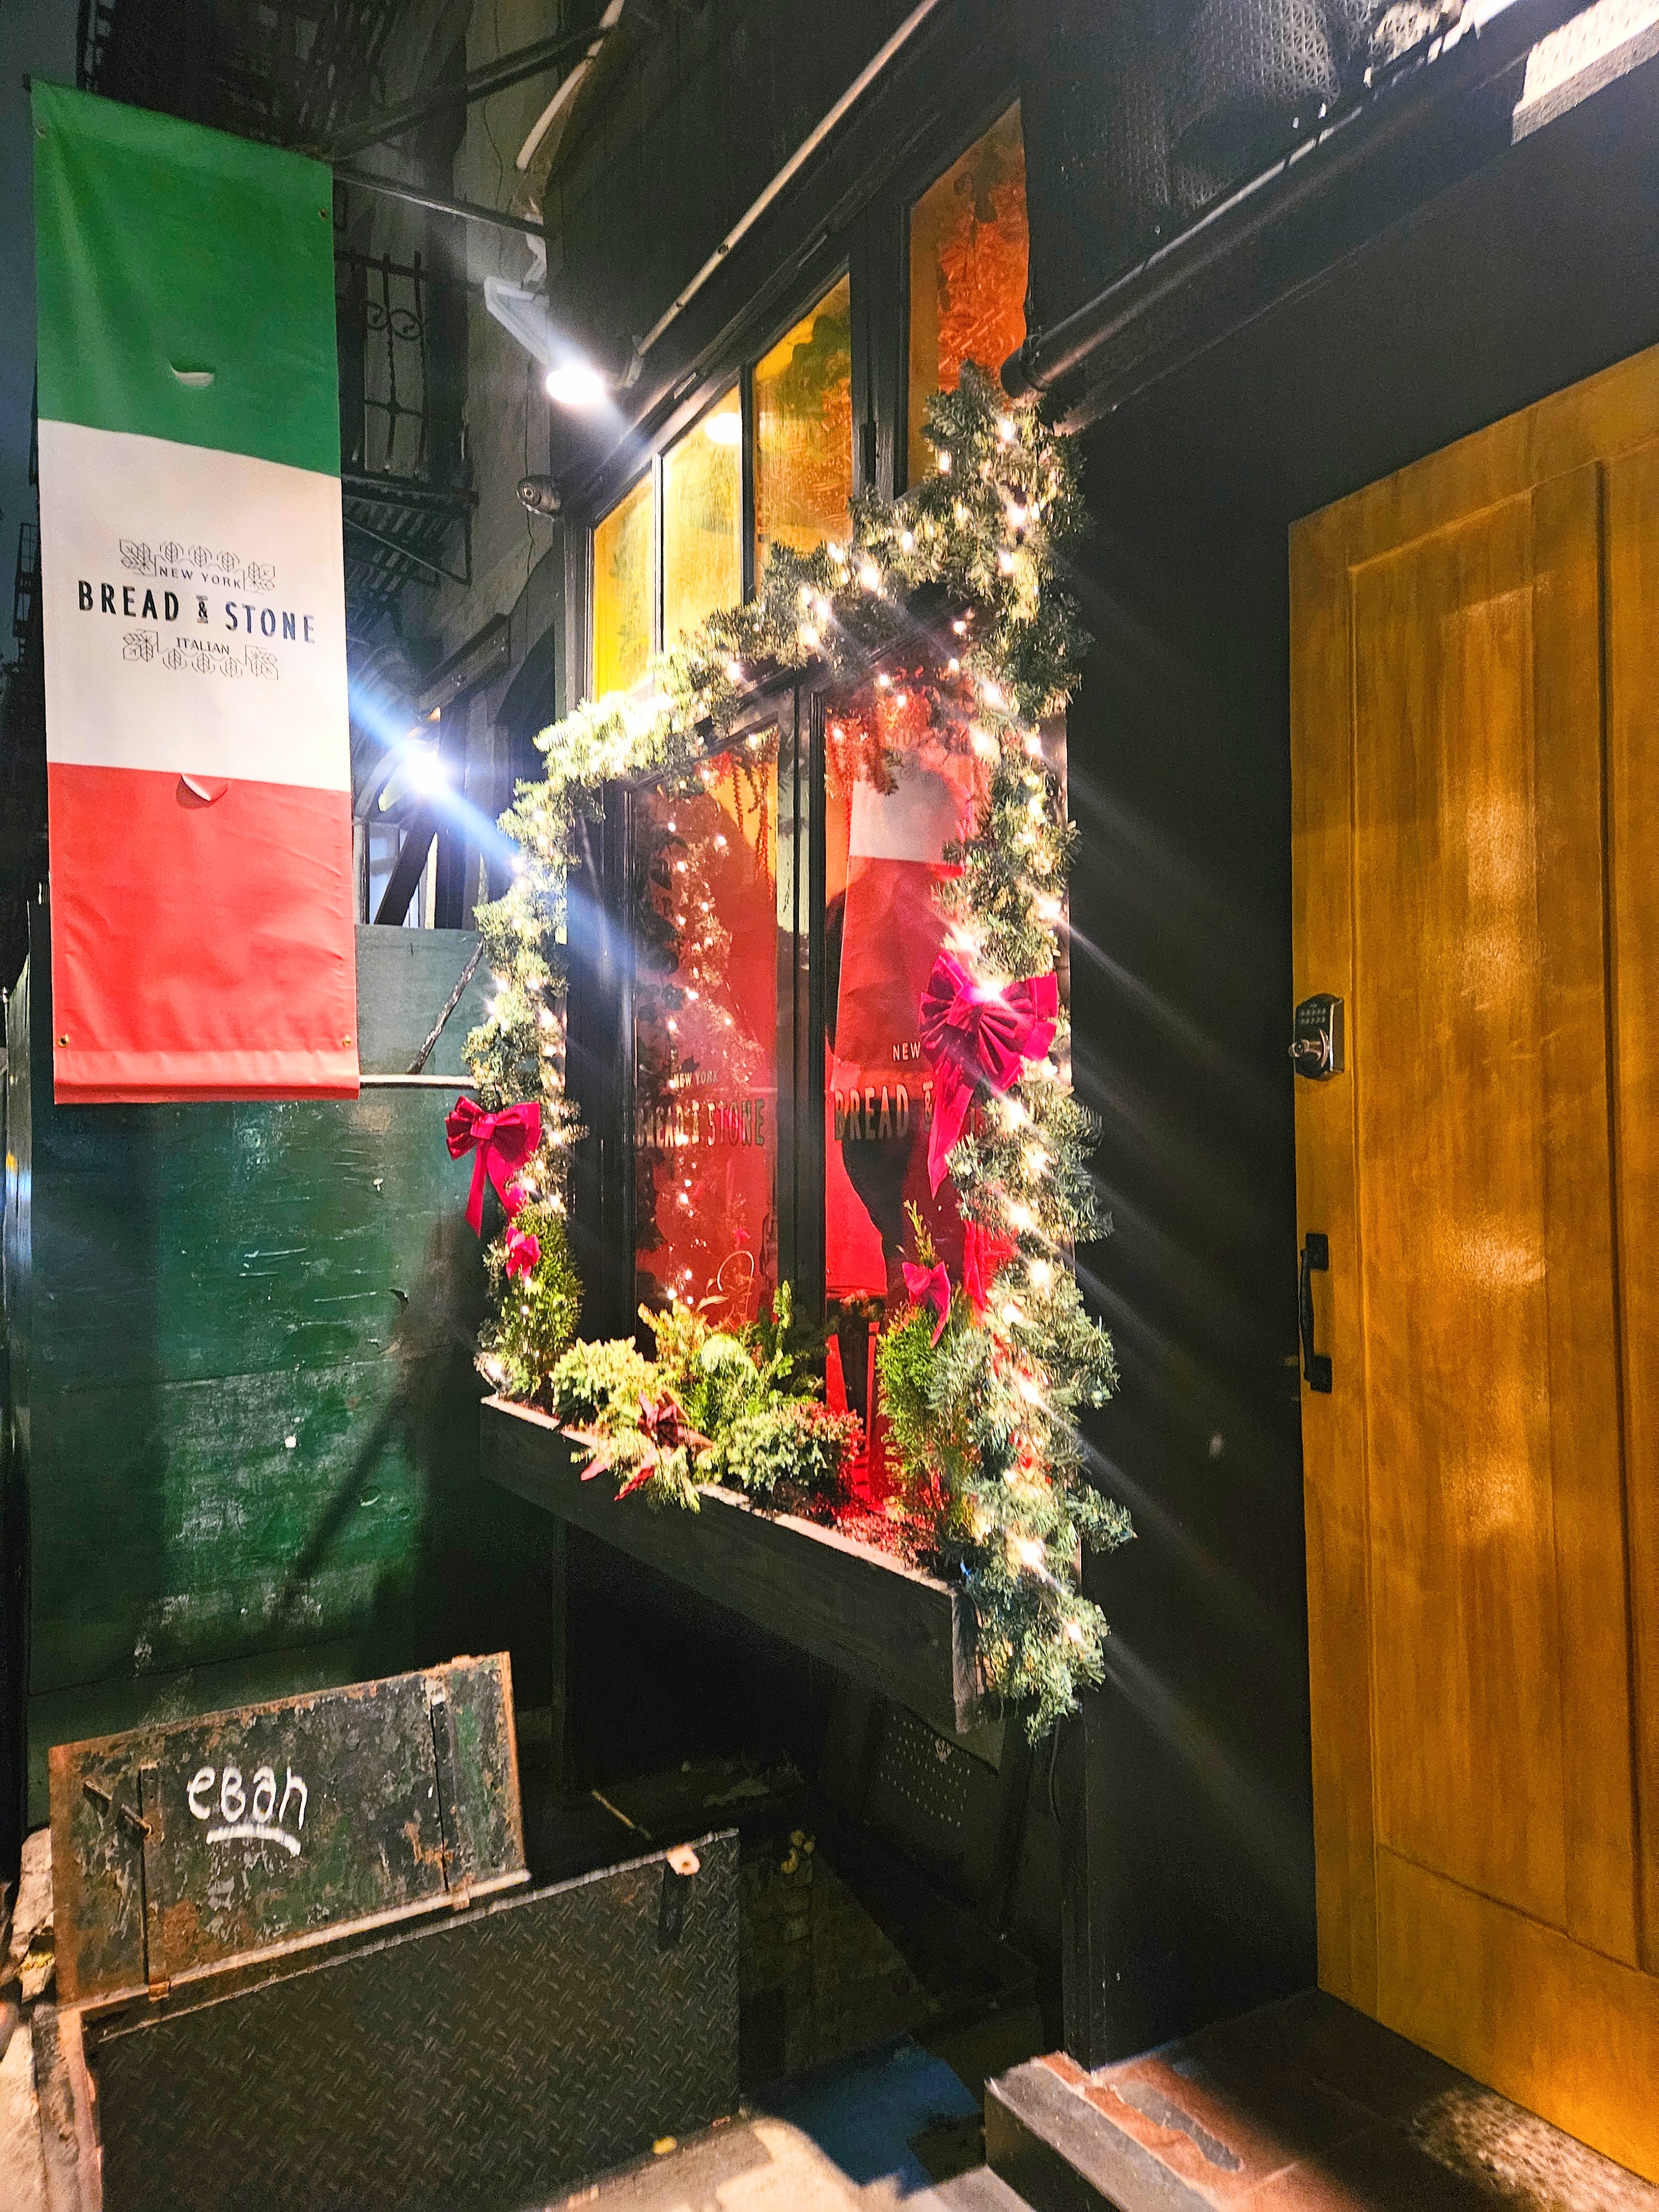 Bread and Stone – hidden Italian deep in the Lower East Side of New York City